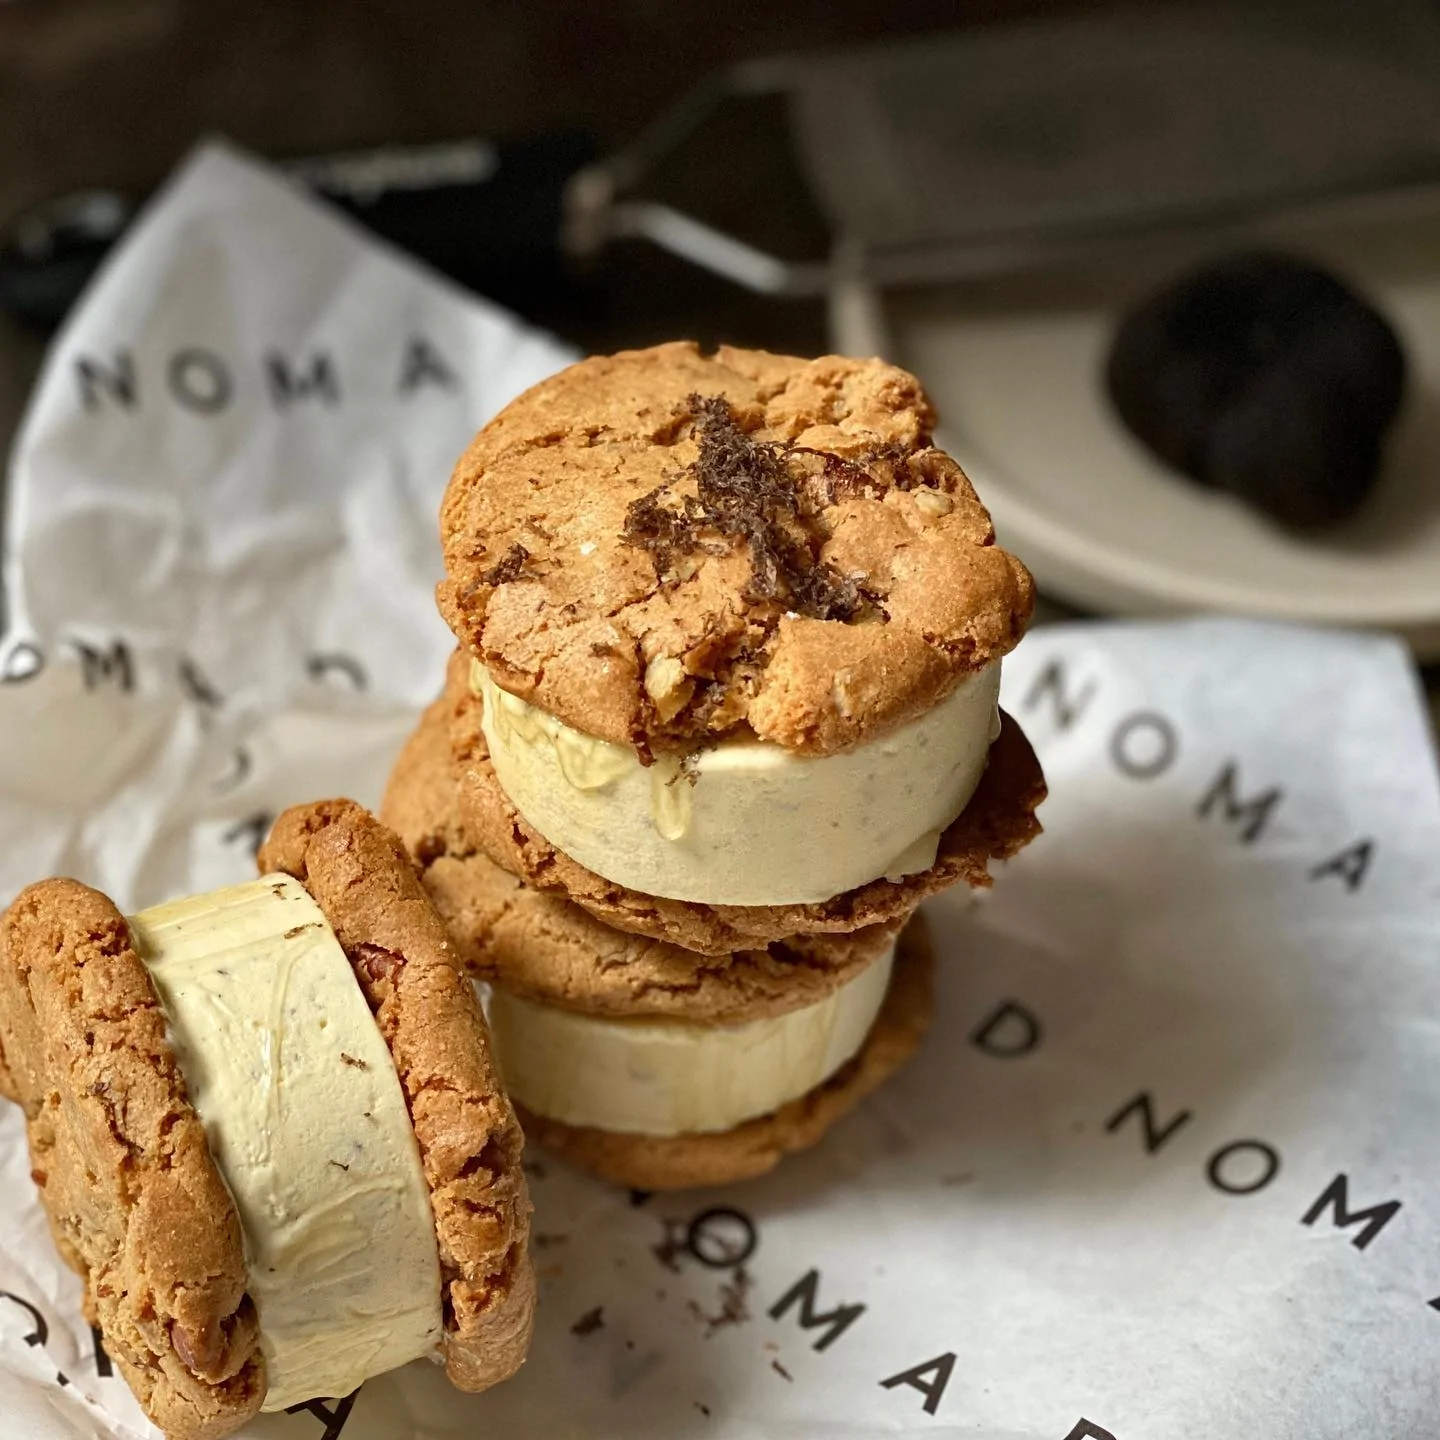 Malfroy's Gold at Nomad - Truffle, pecan, honey, oilive oil icecream cookies